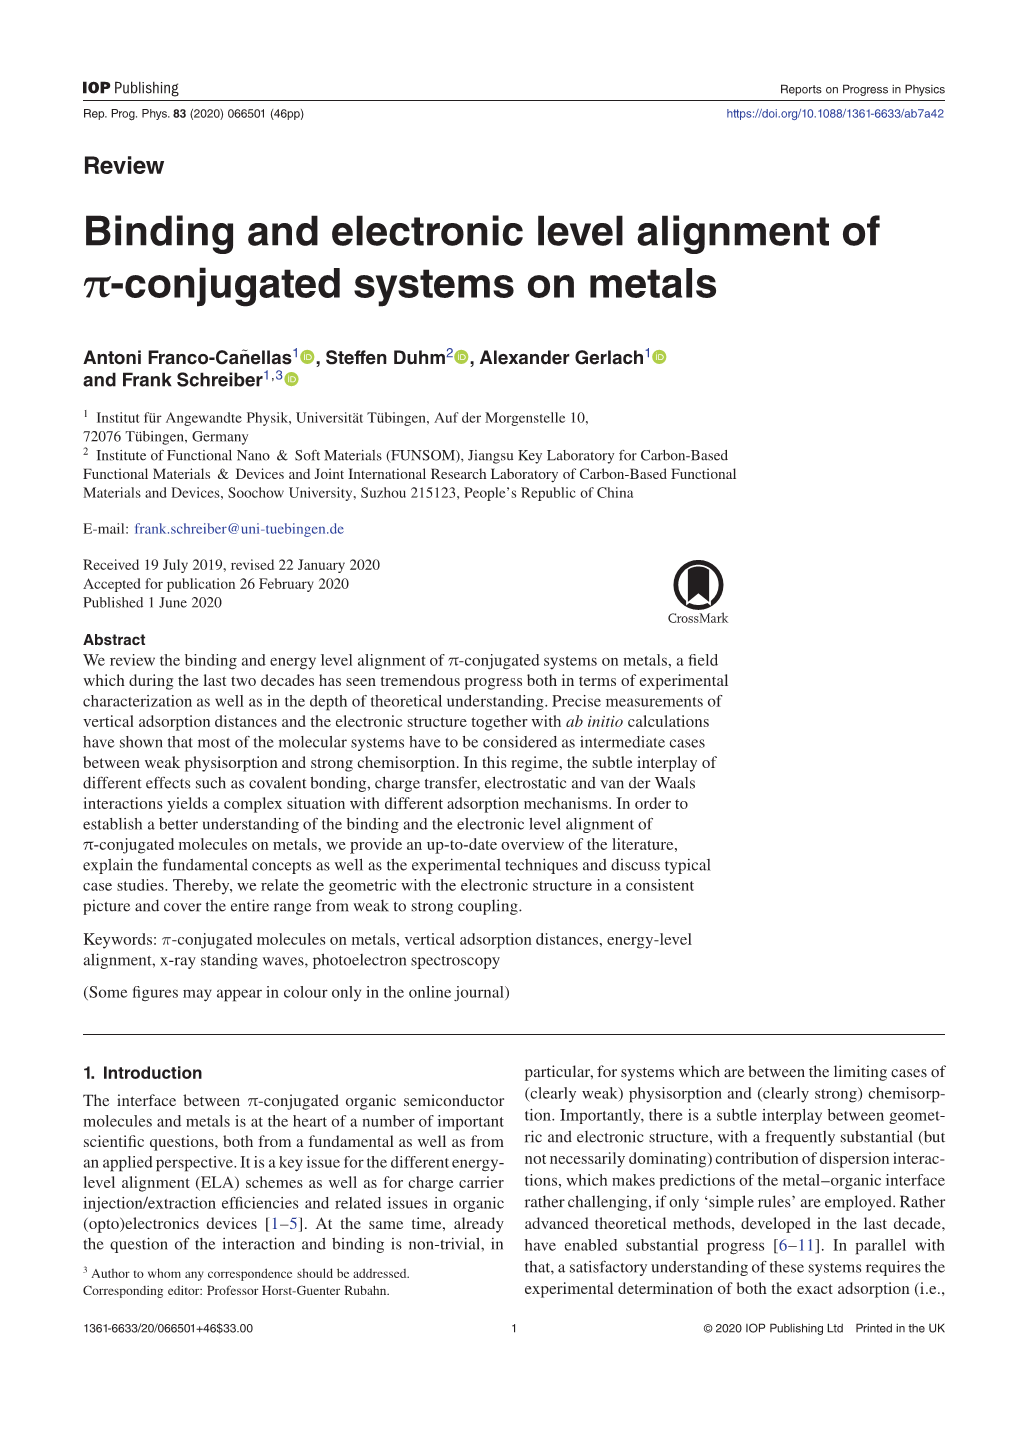 Binding and Electronic Level Alignment of Π-Conjugated Systems on Metals